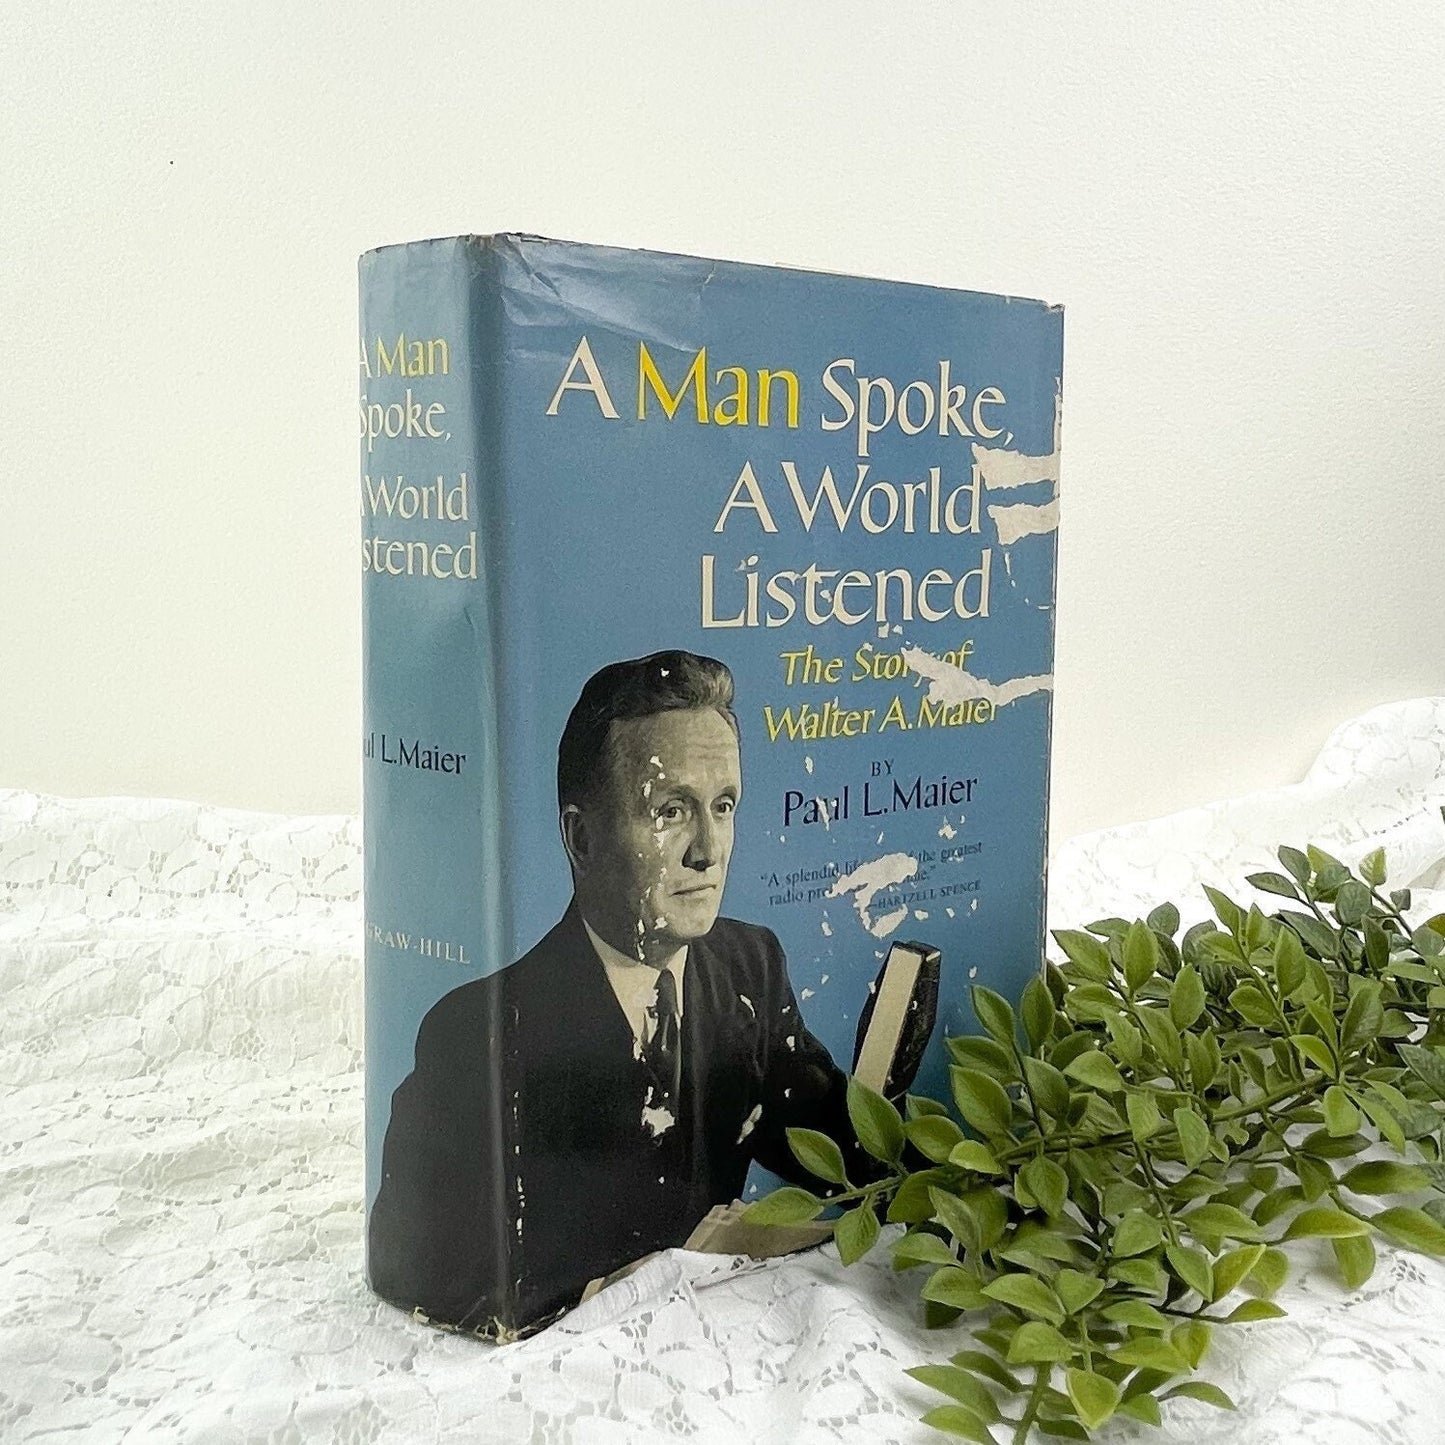 A Man Spoke, A World Listened signed by Paul L. Maier